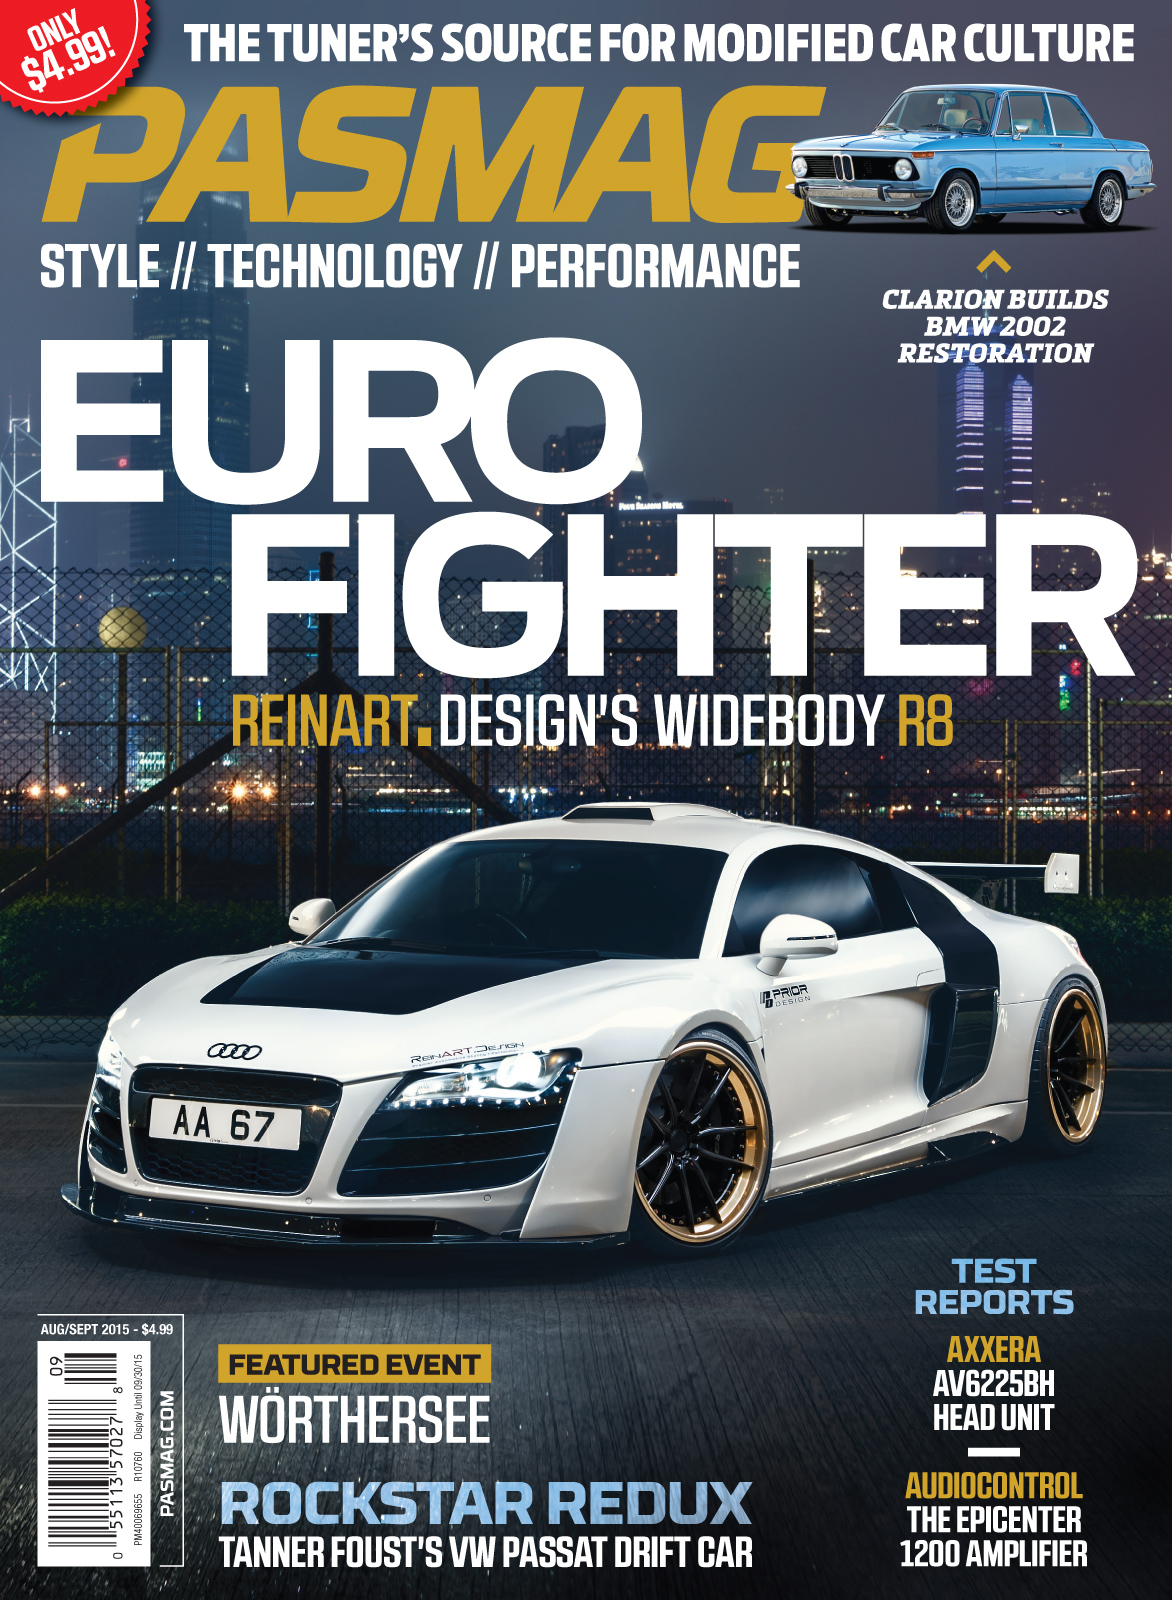 PASMAG #132 August/September 2015 Cover USA